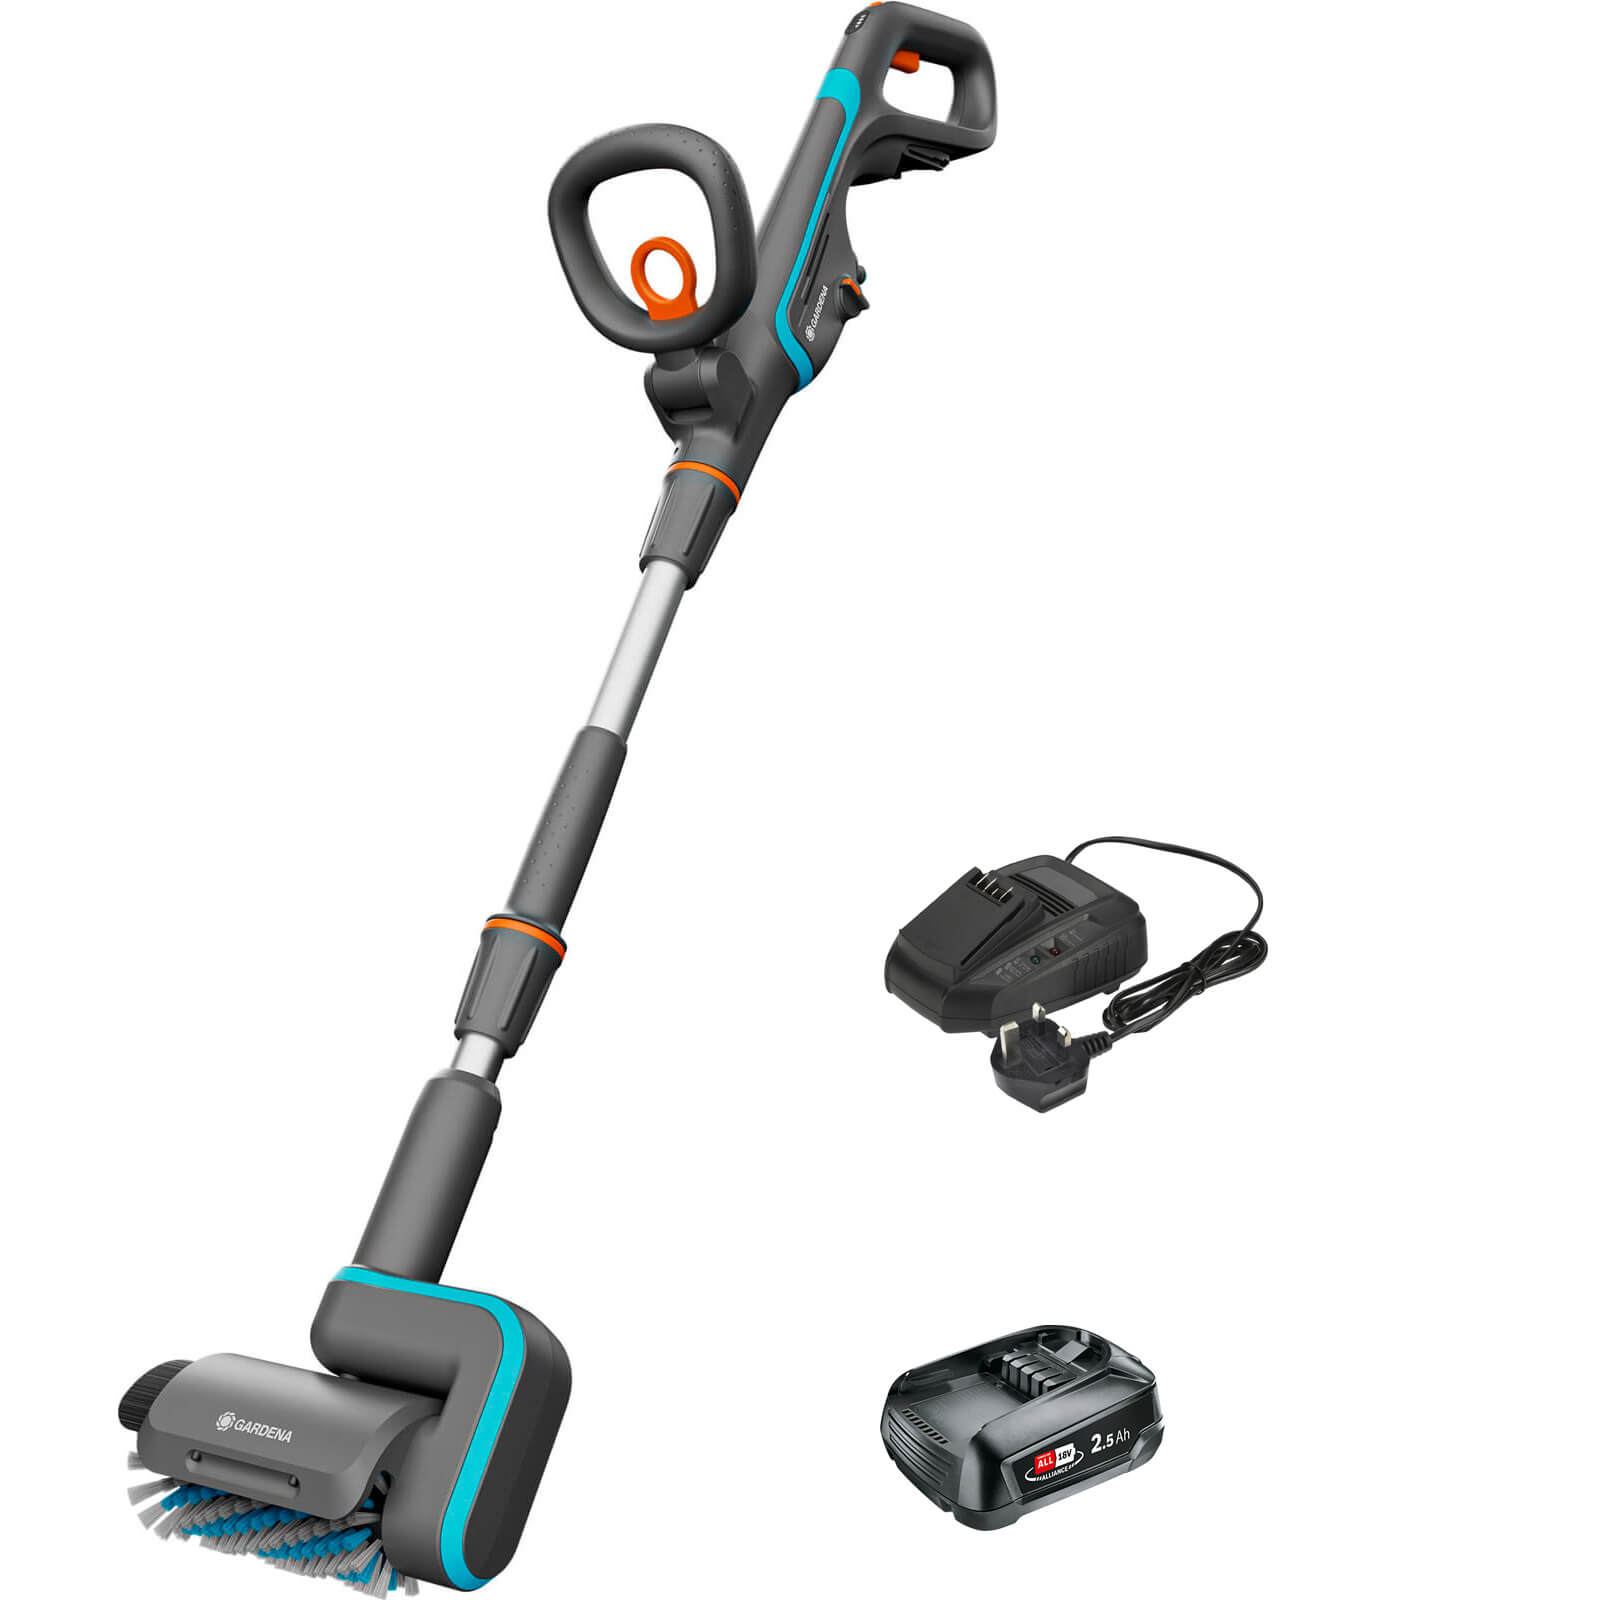 Photos - Other household chemicals GARDENA AQUABRUSH P4A 18v Cordless Patio and Surface Cleaner 1 x 2.5ah Li 